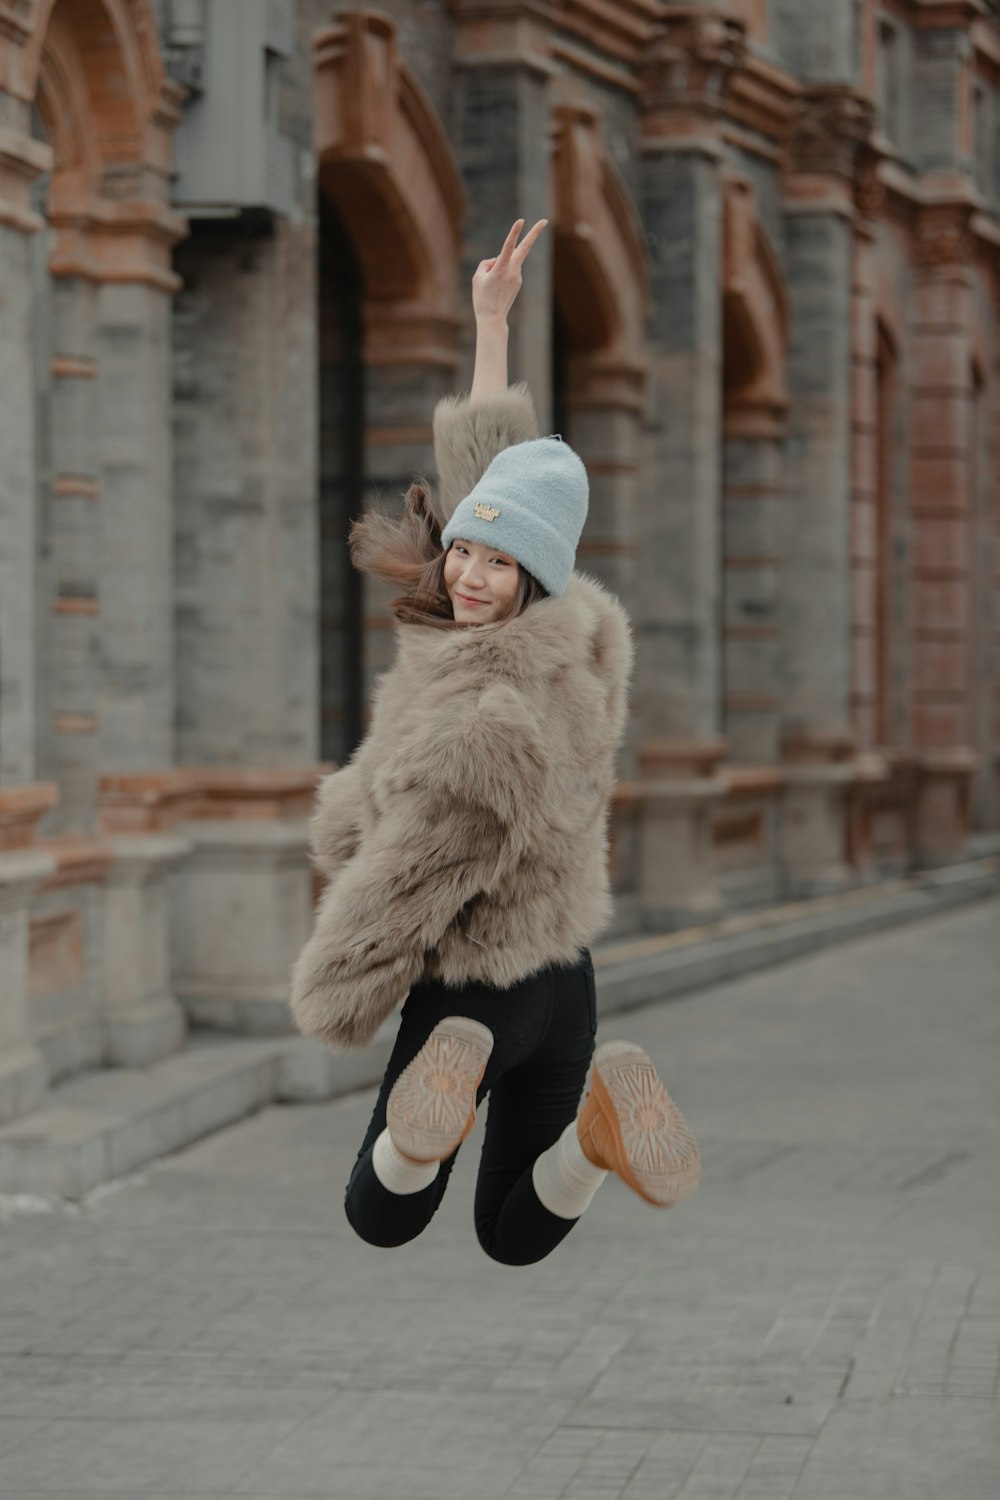 a woman in a fur coat is jumping in the air